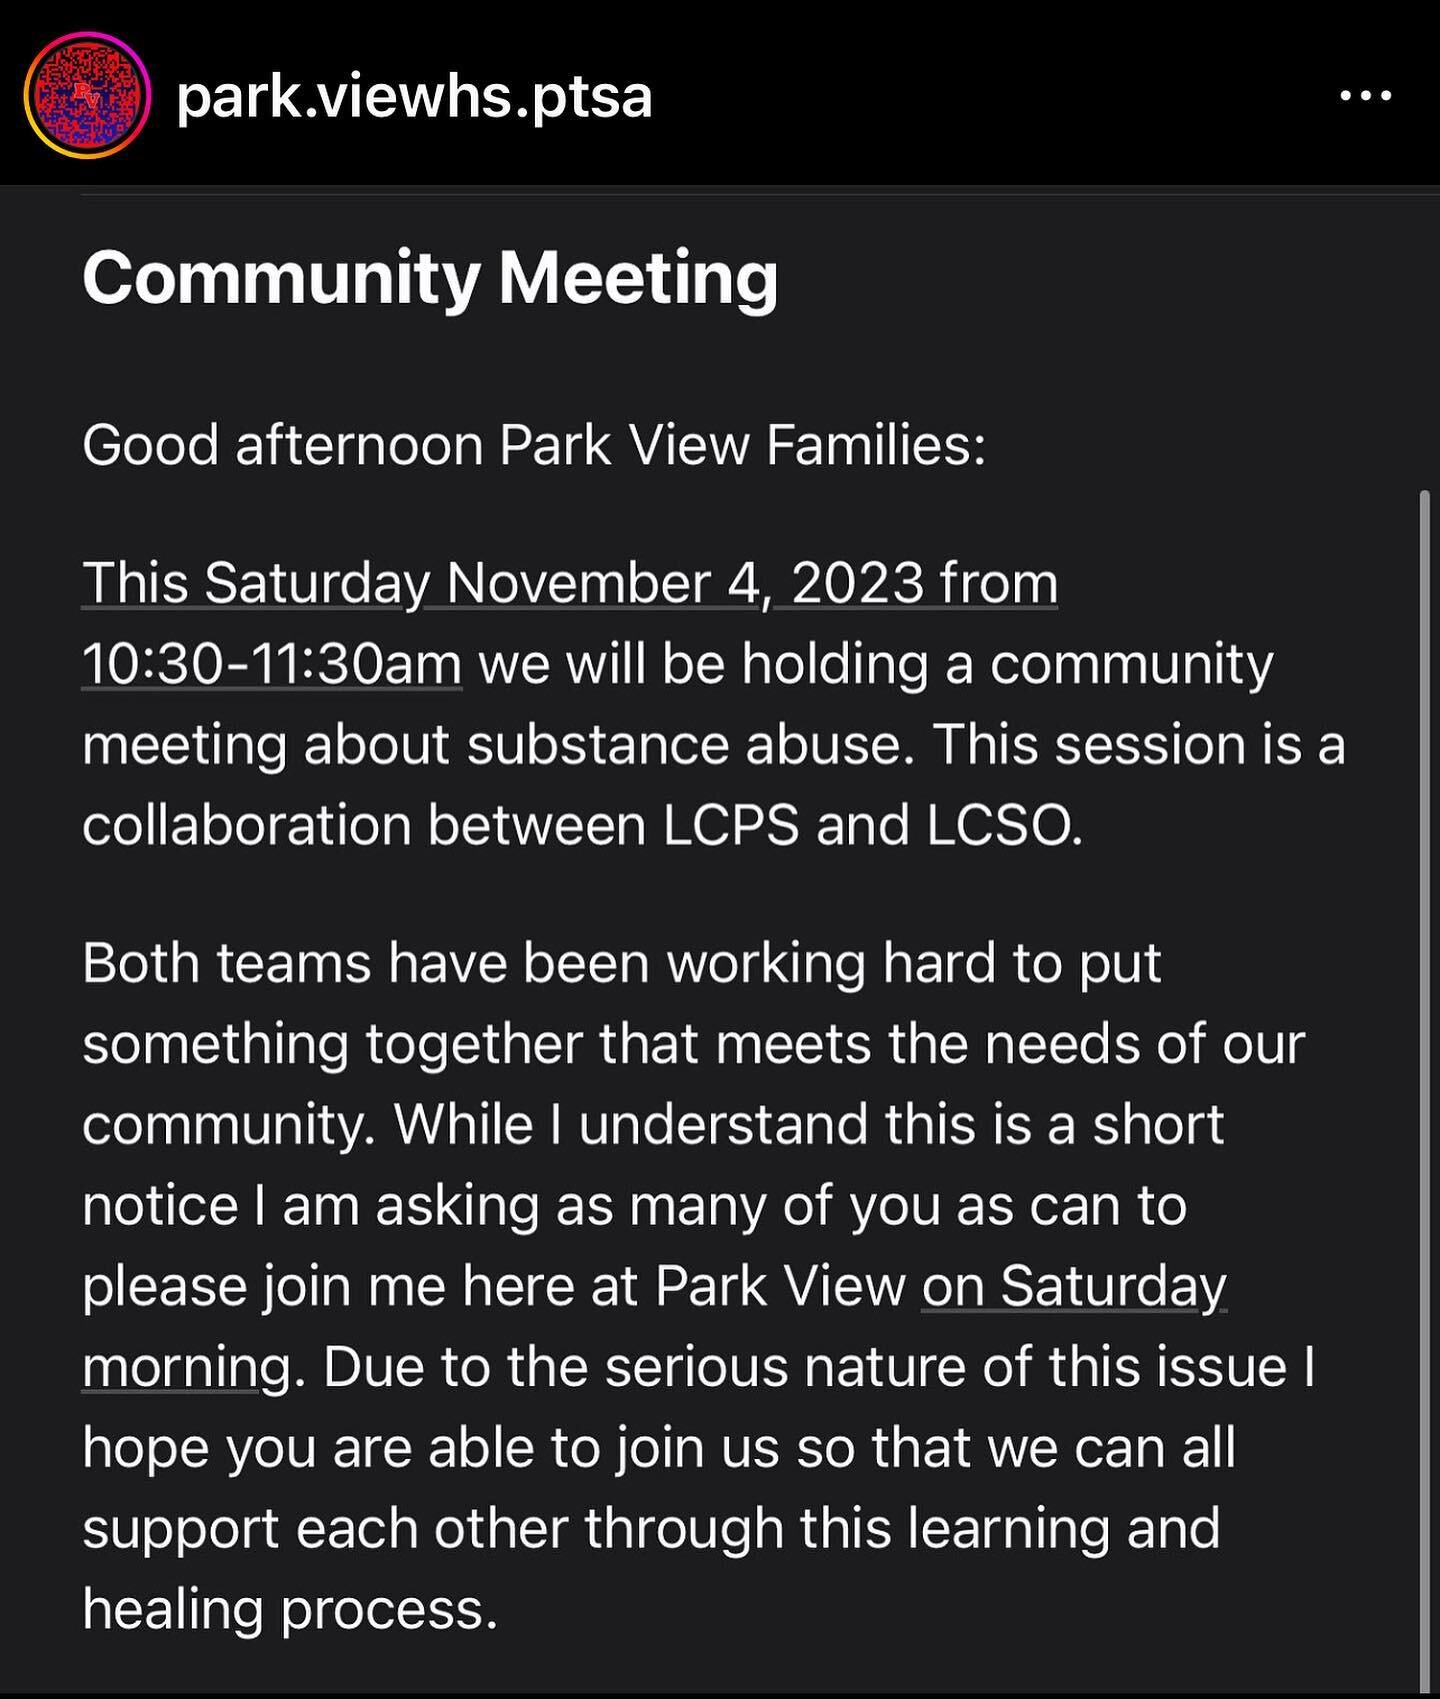 Excited to see this happening so parents can meaningfully engage with both @lcpsofficial and @loudounsheriff on this important issue. #sterlingva